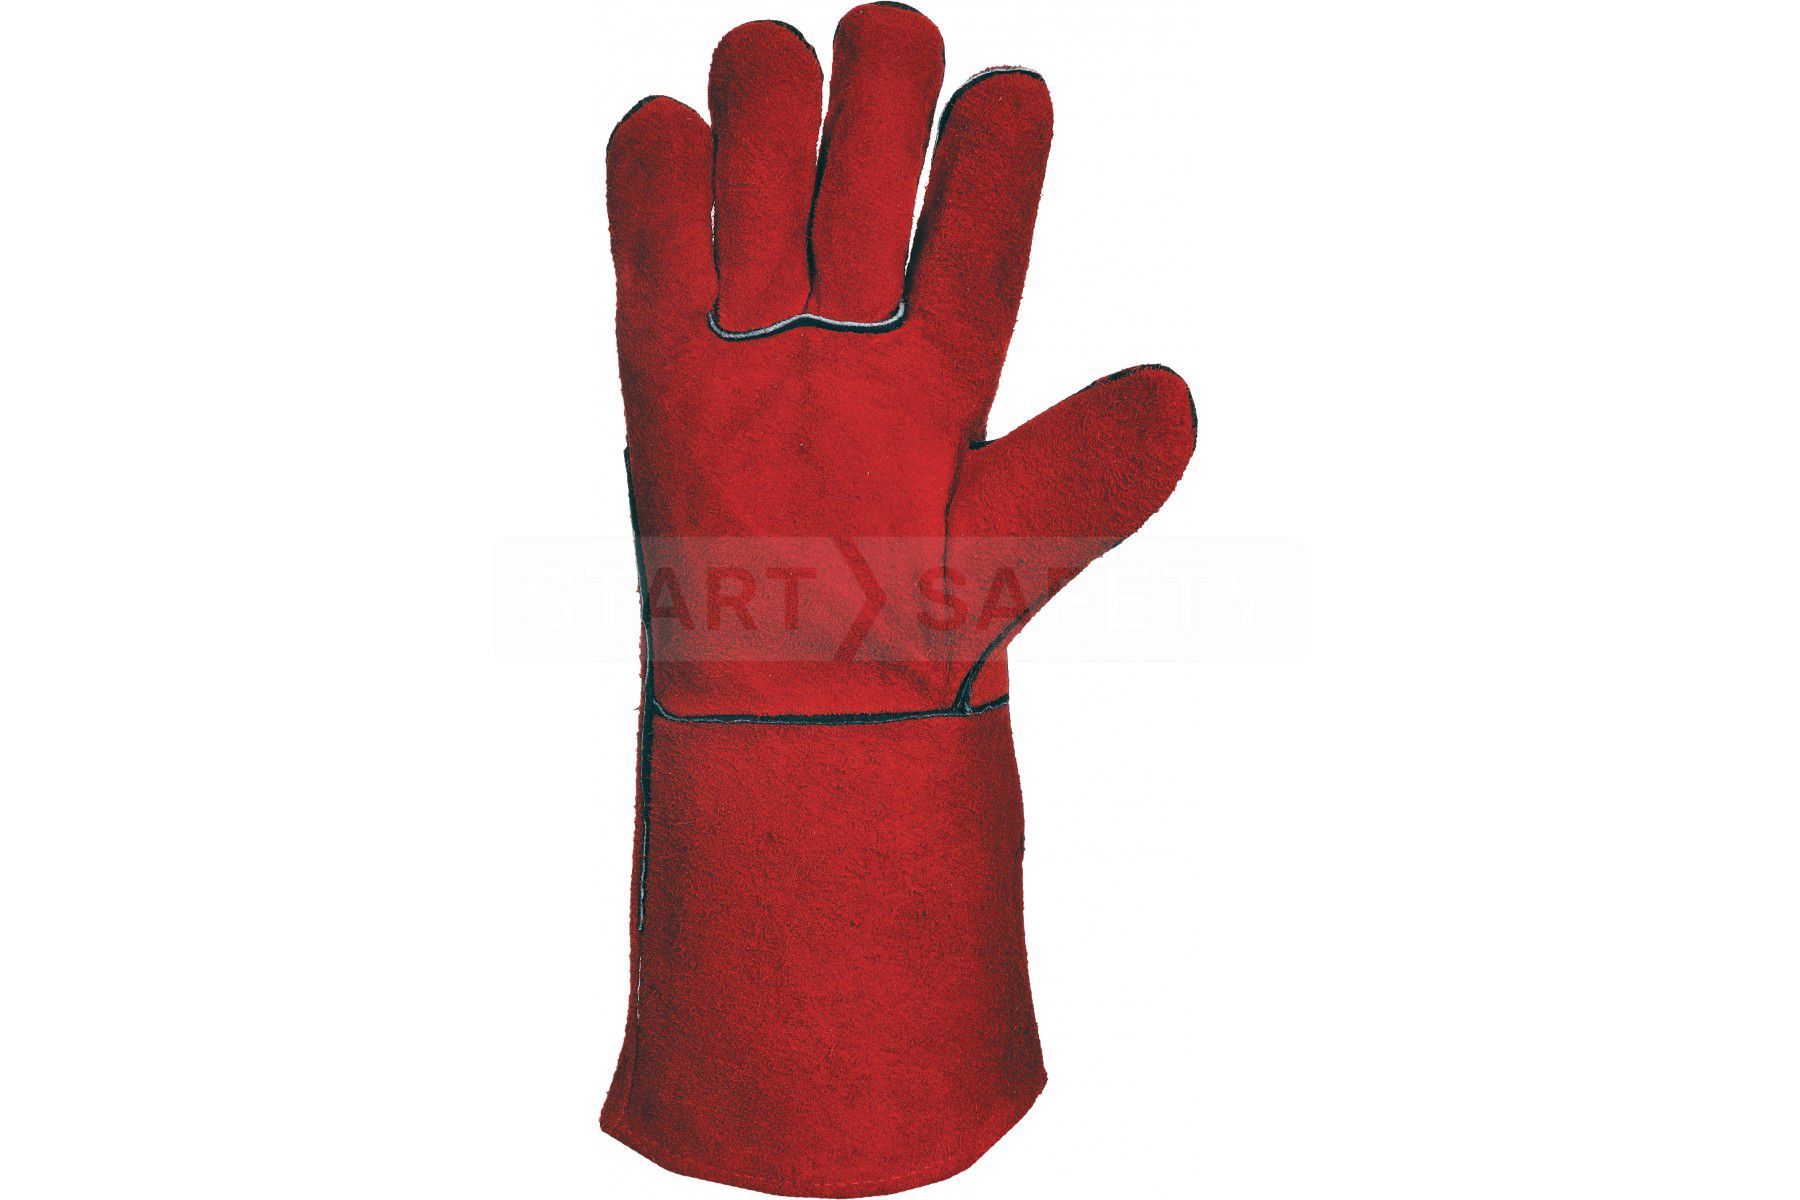 35/40cm Heavy Duty Welding Gloves Leather Cowhide Protect